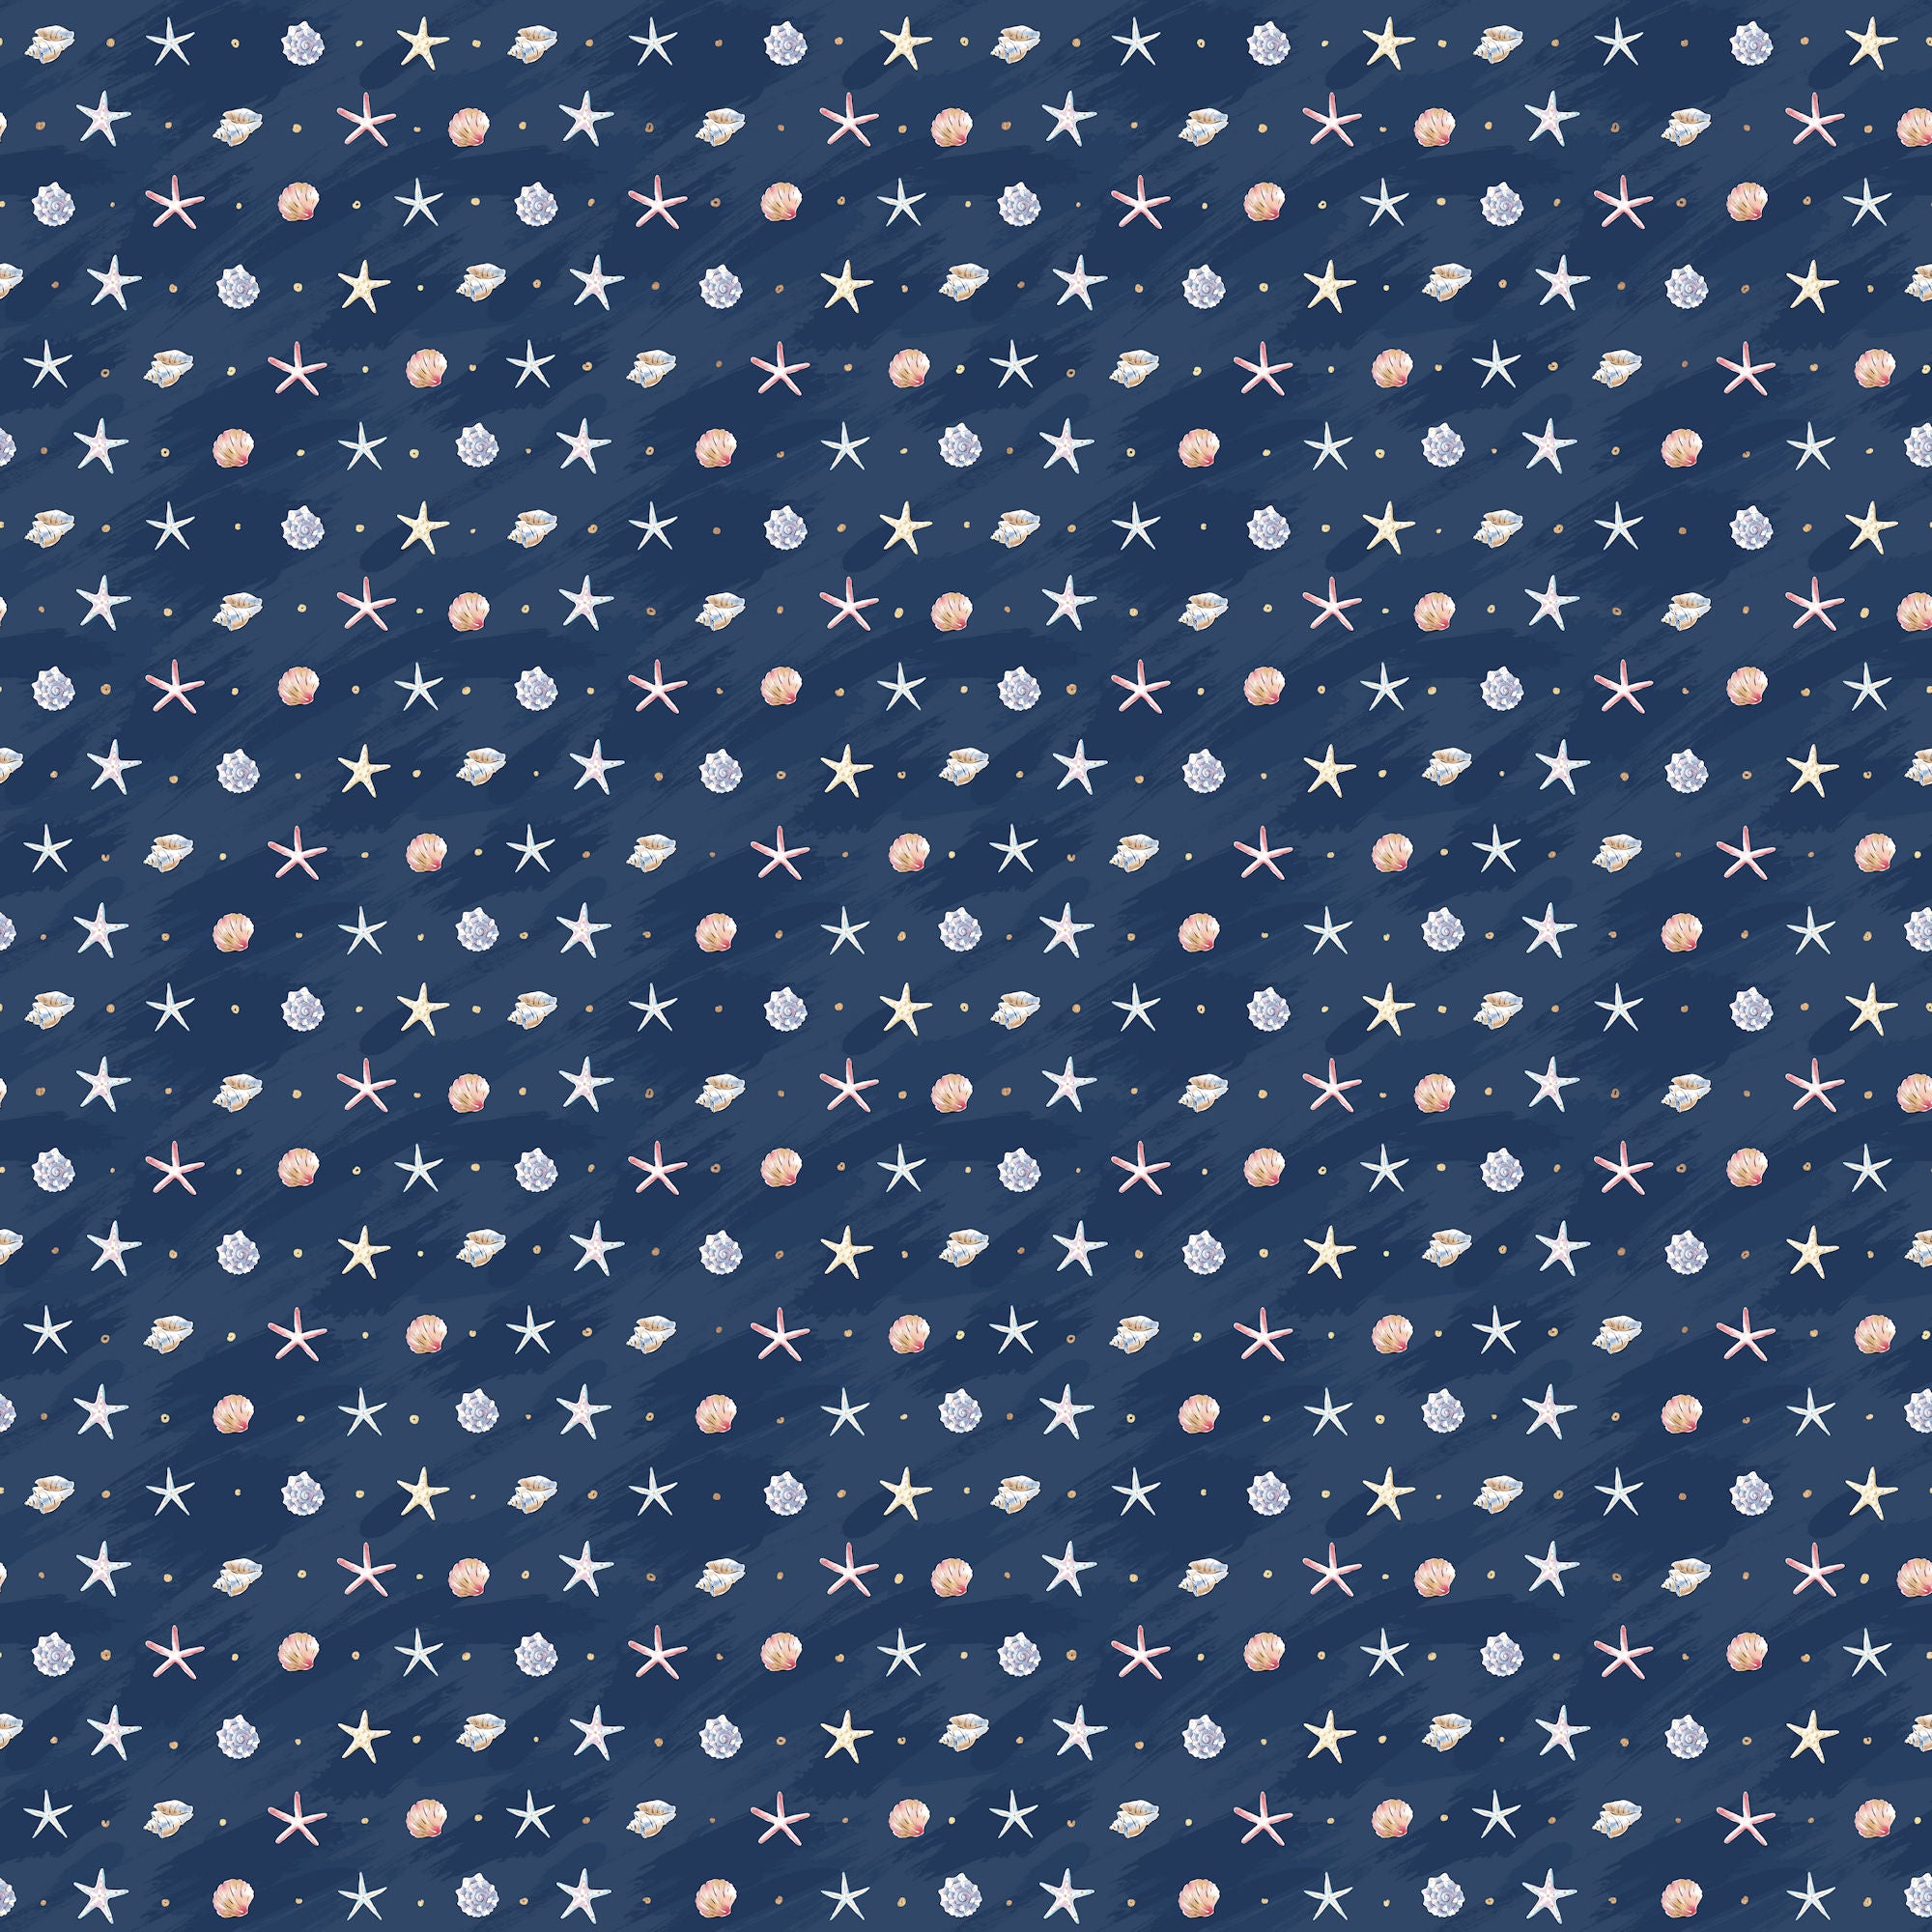 Nautical Summer Collection Take Me Sailing 12 x 12 Double-Sided Scrapbook Paper by SSC Designs